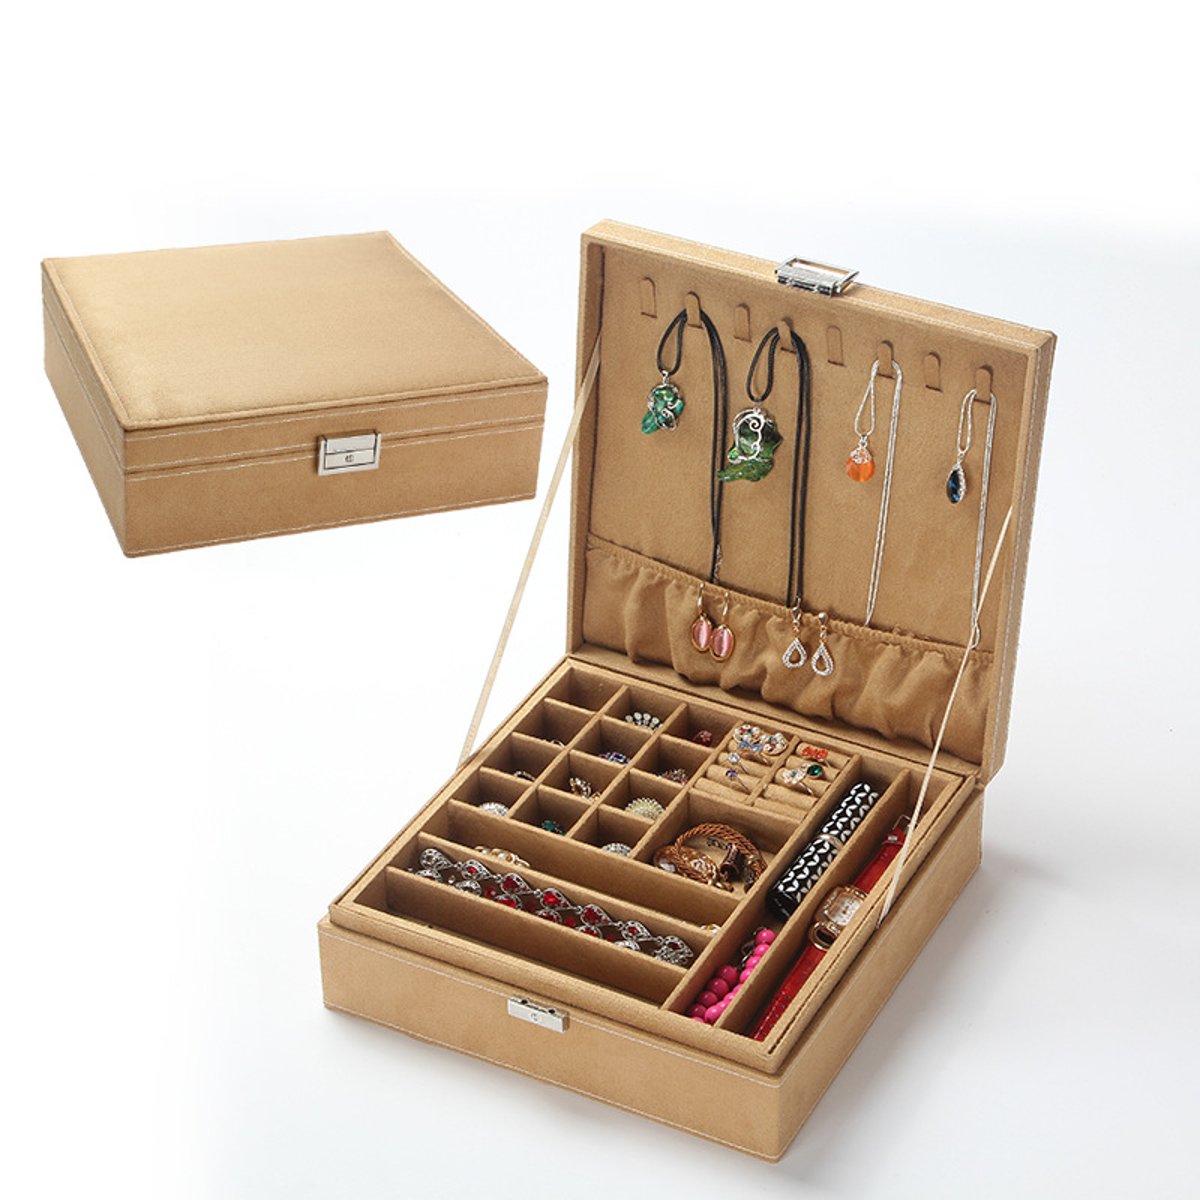 Multi-function-Vintage-Jewelry-Box-Organizers-Two-layer-Lockable-Jewelry-Display-Storage-Case-1855370-26